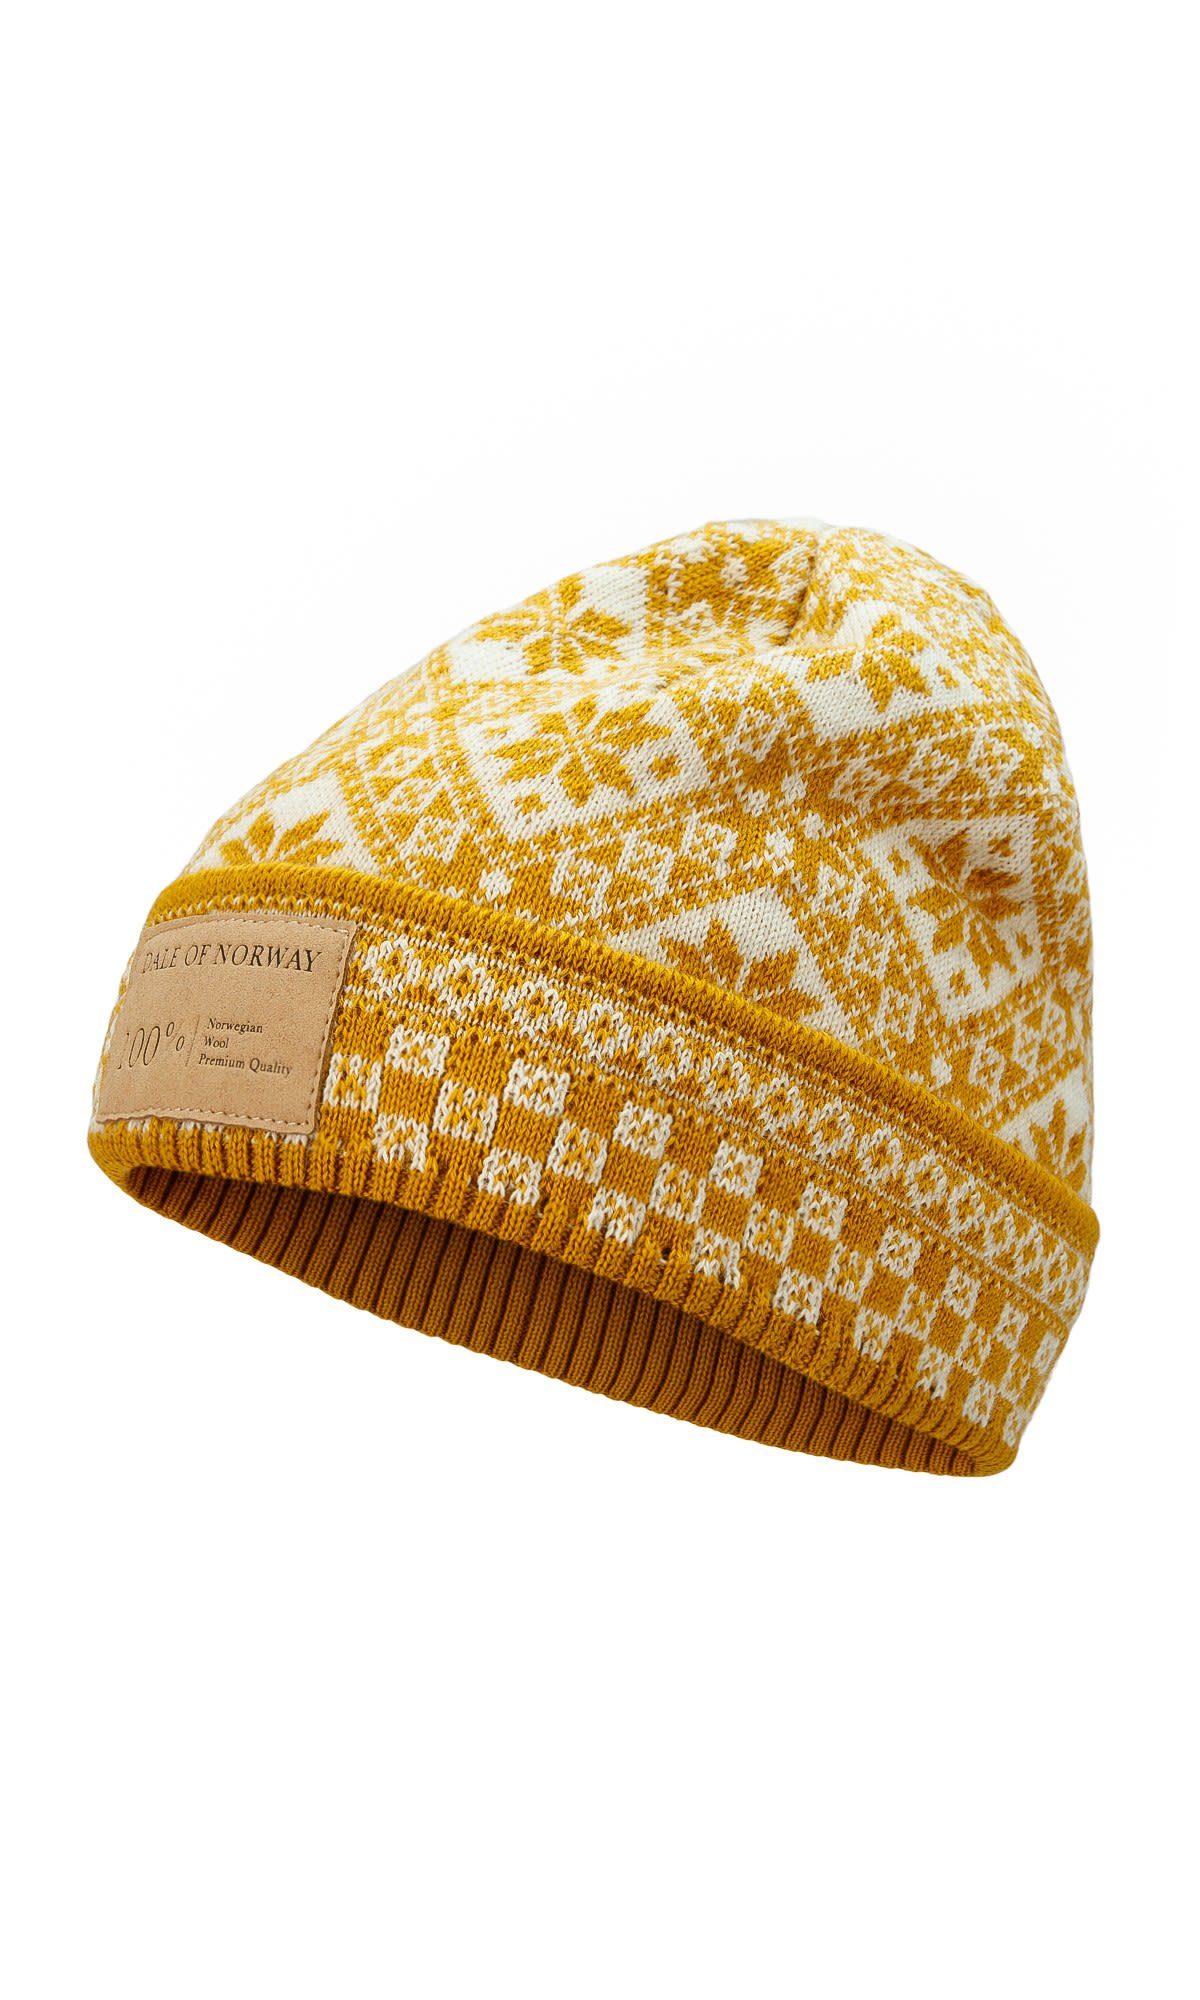 Of Offwhite of Norway Beanie Dale Dale Mustard Bjoroy Hat Norway Accessoires